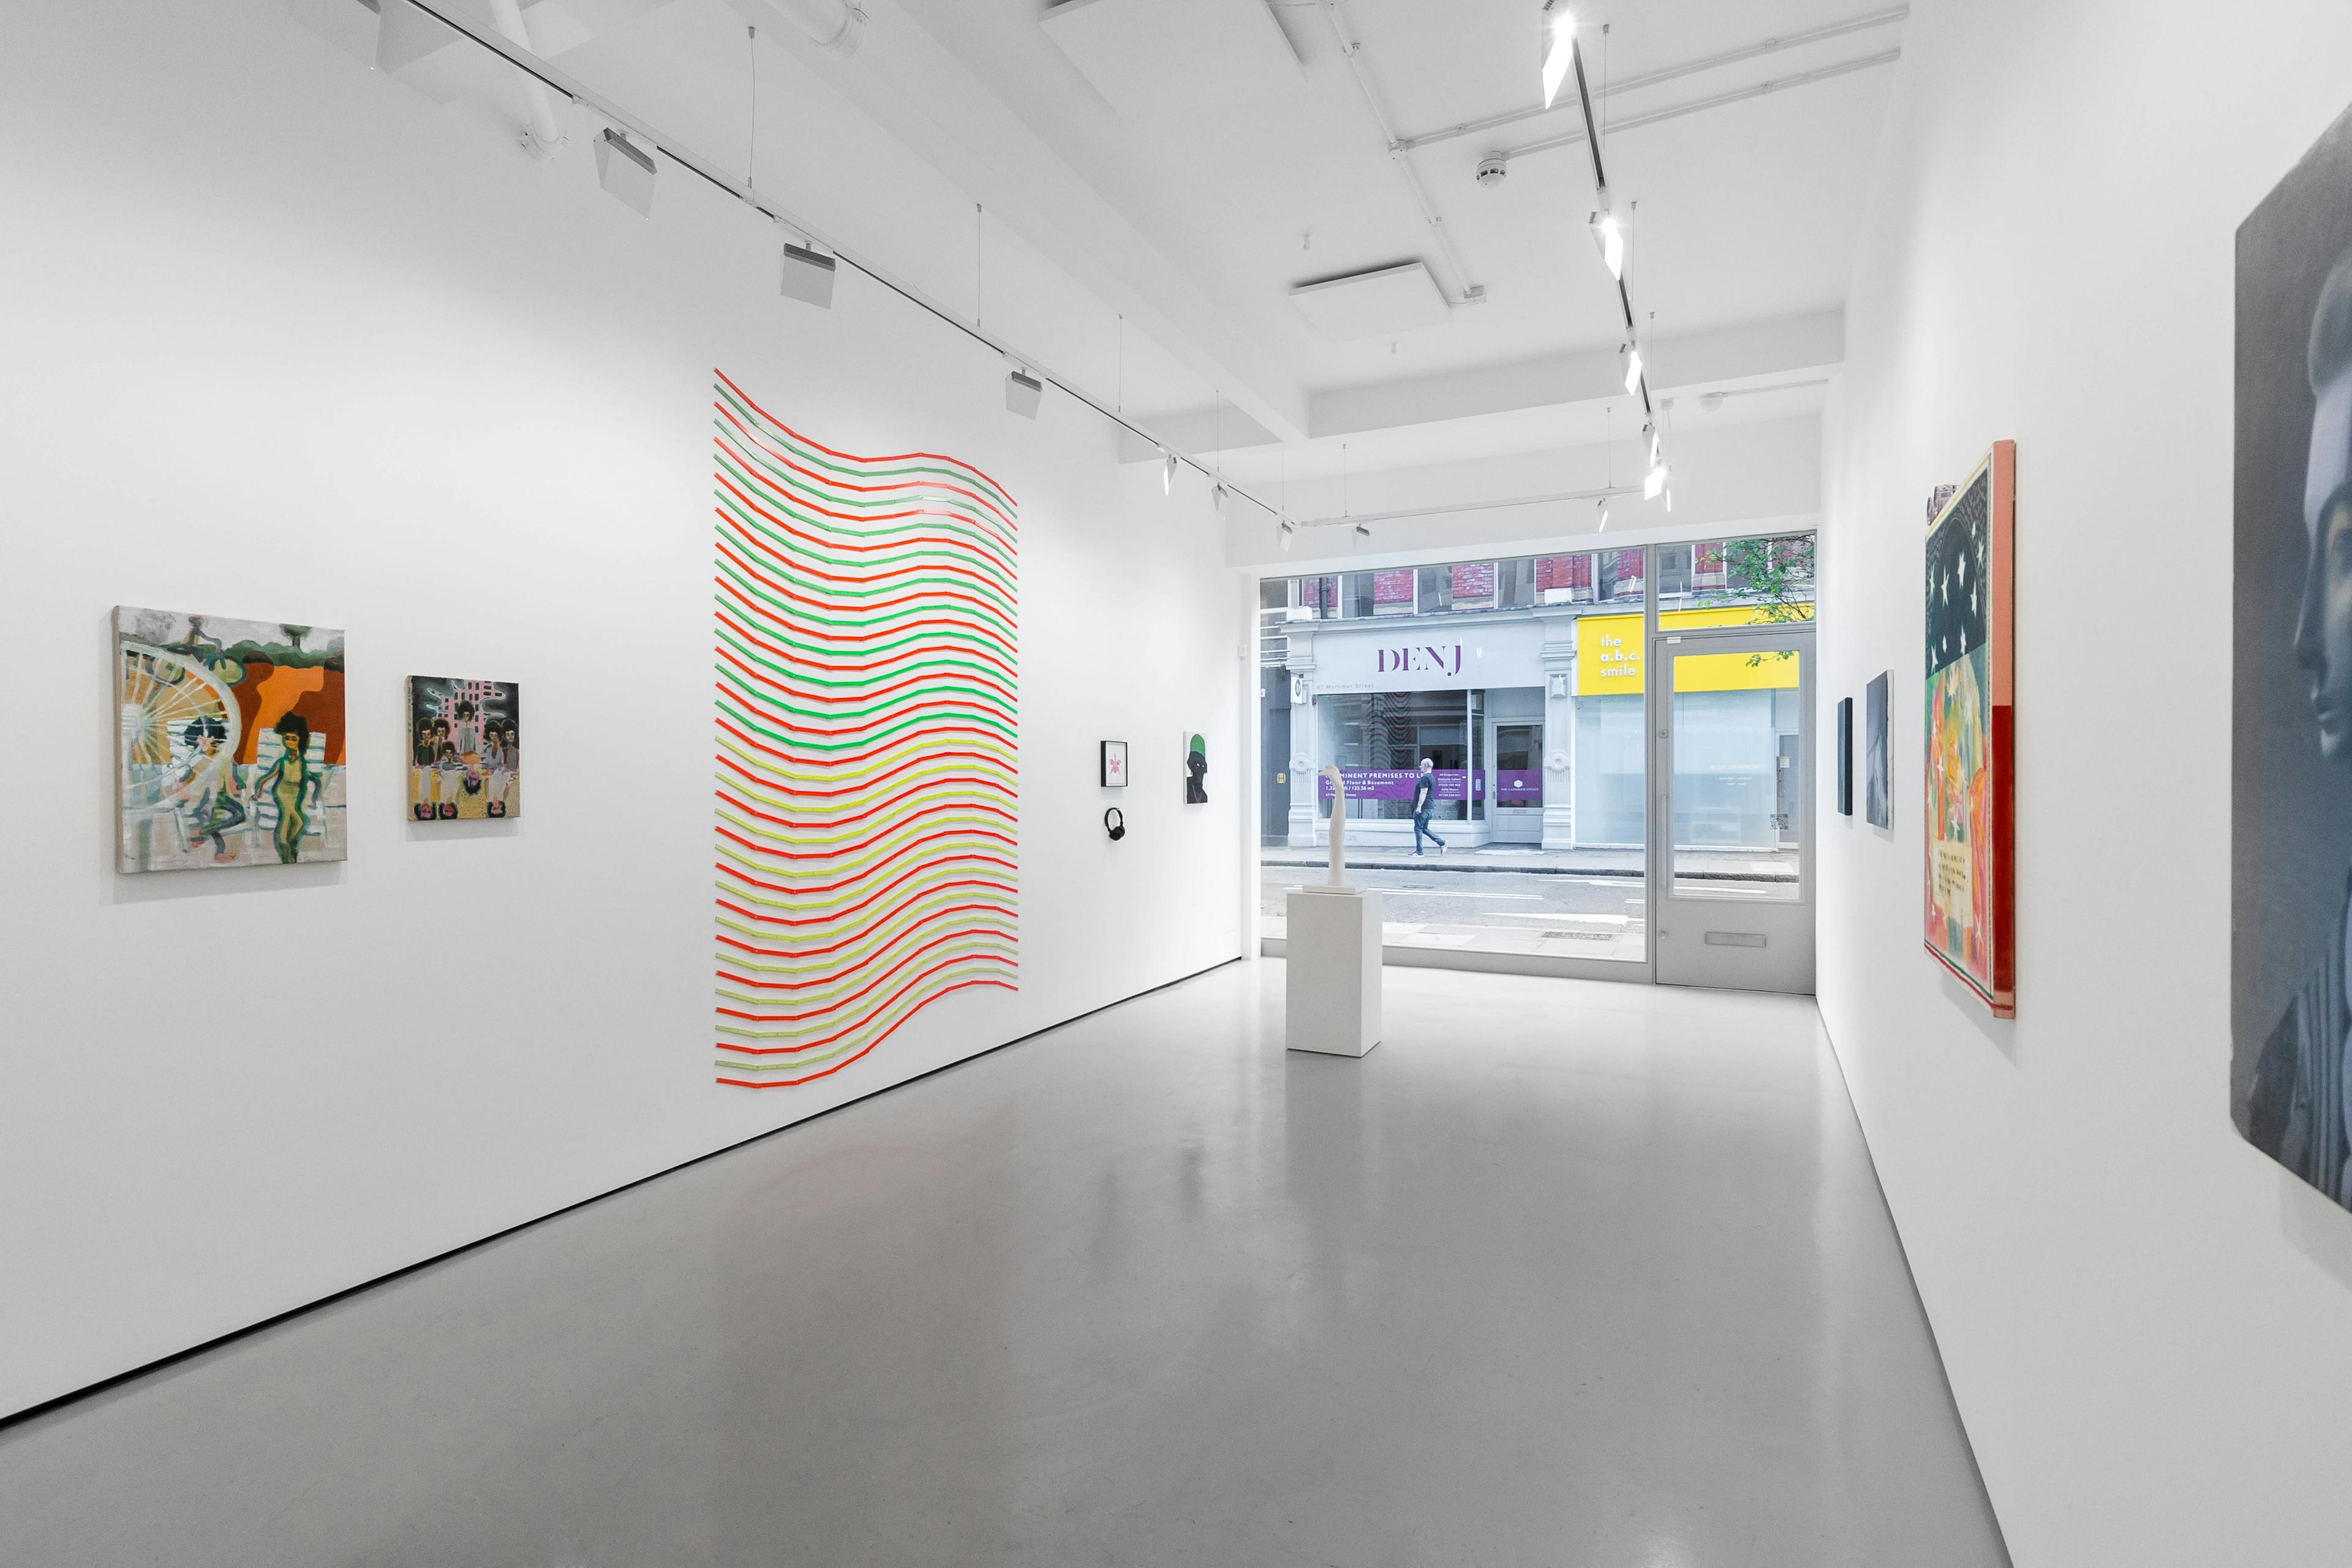 Installation views of 'Kaleidoscope' the inaugural group exhibition at Workplace in 50 Mortimer Street, Fitzrovia, London.